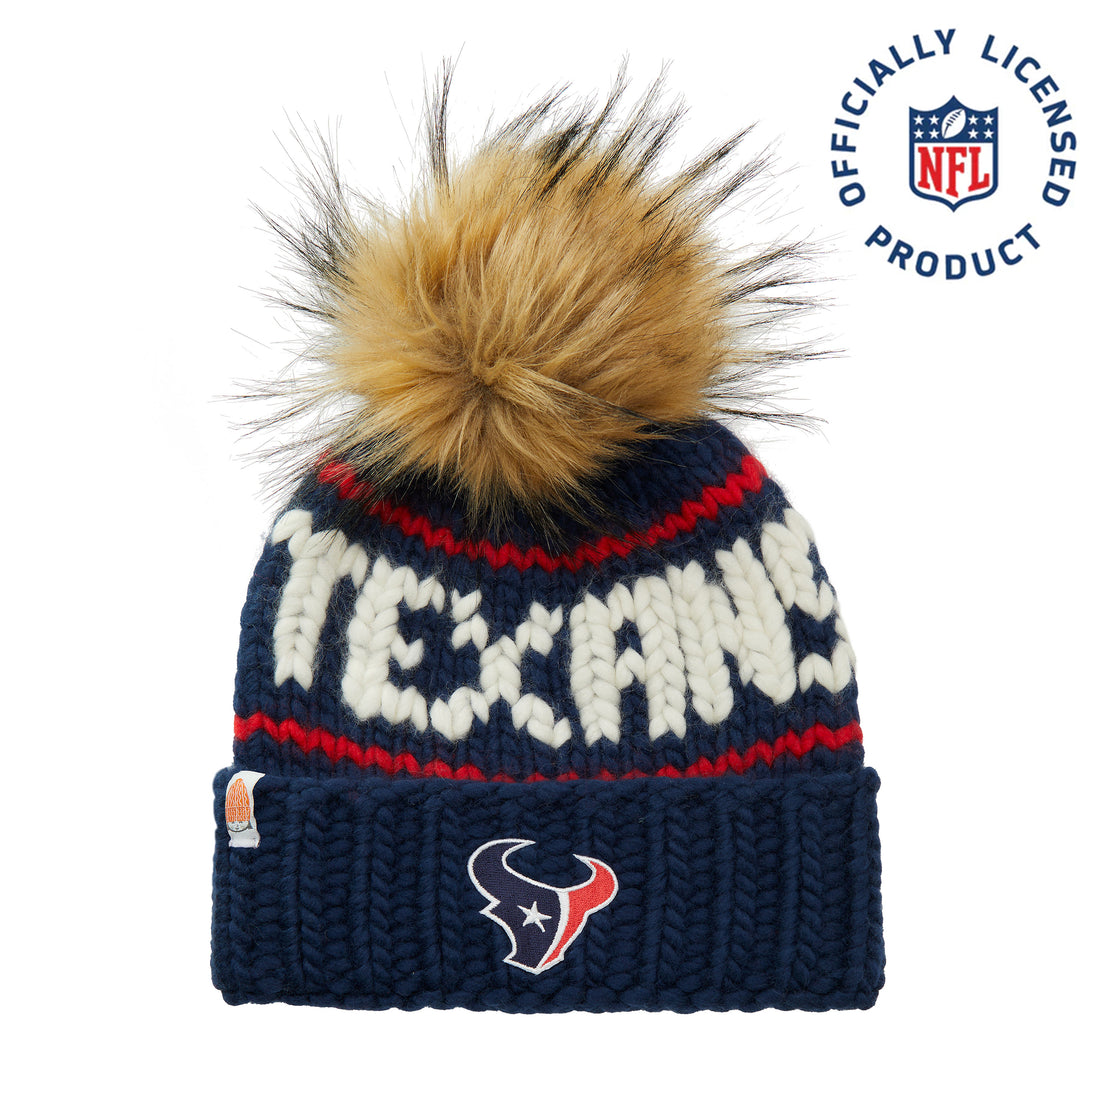 The Texans NFL Beanie with Faux Fur Pom